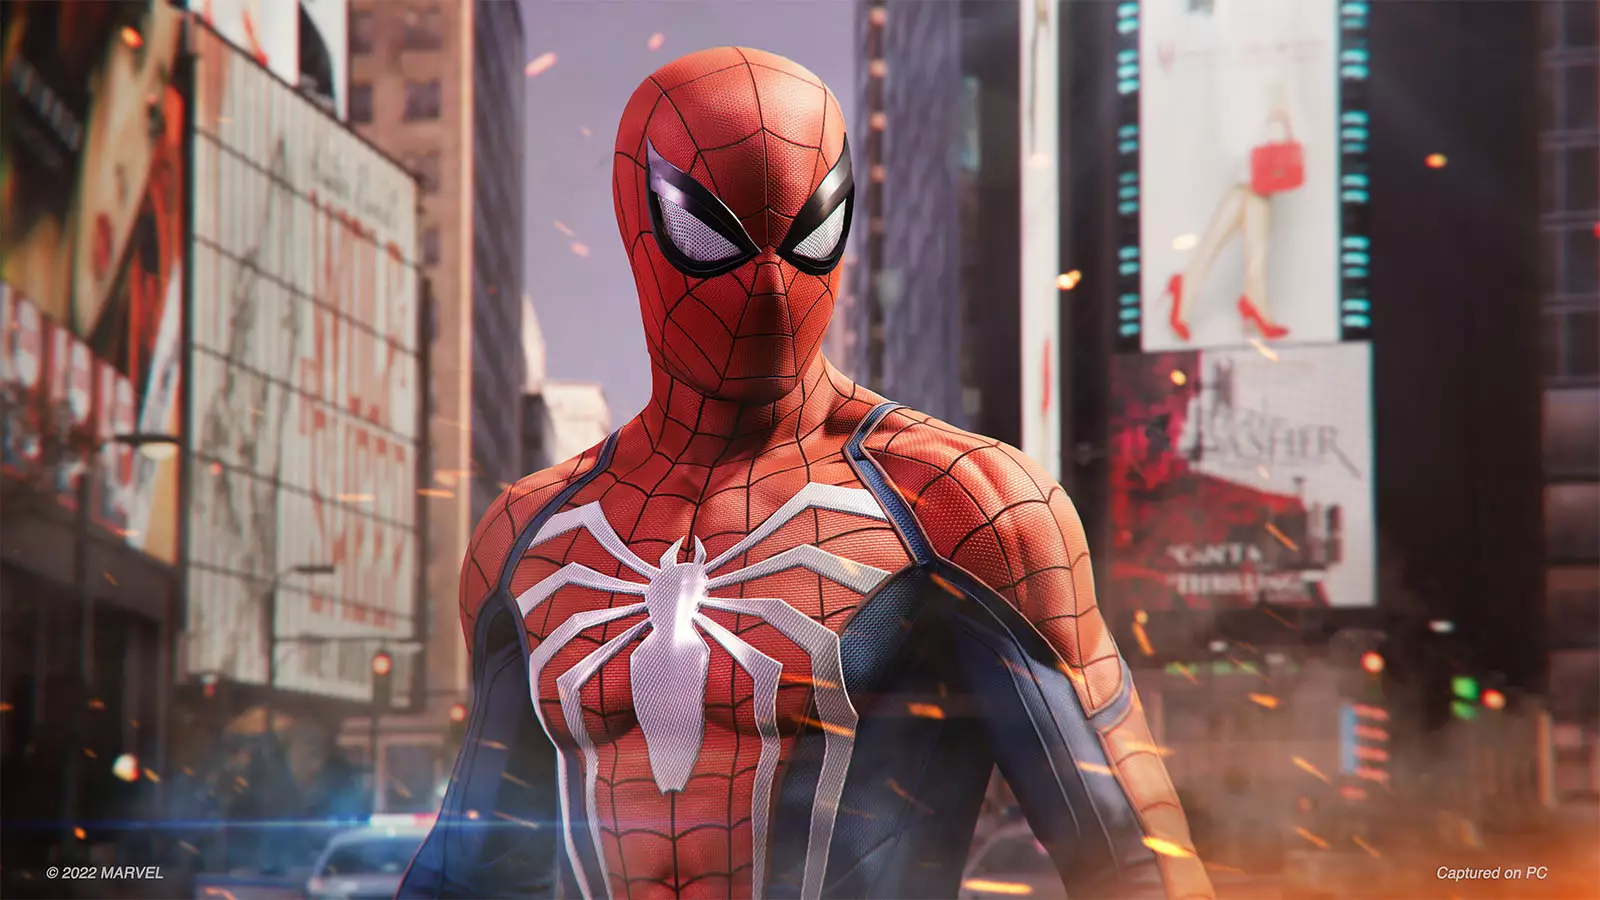 Marvel's Spider-Man Remastered Steam Key for PC - Buy now